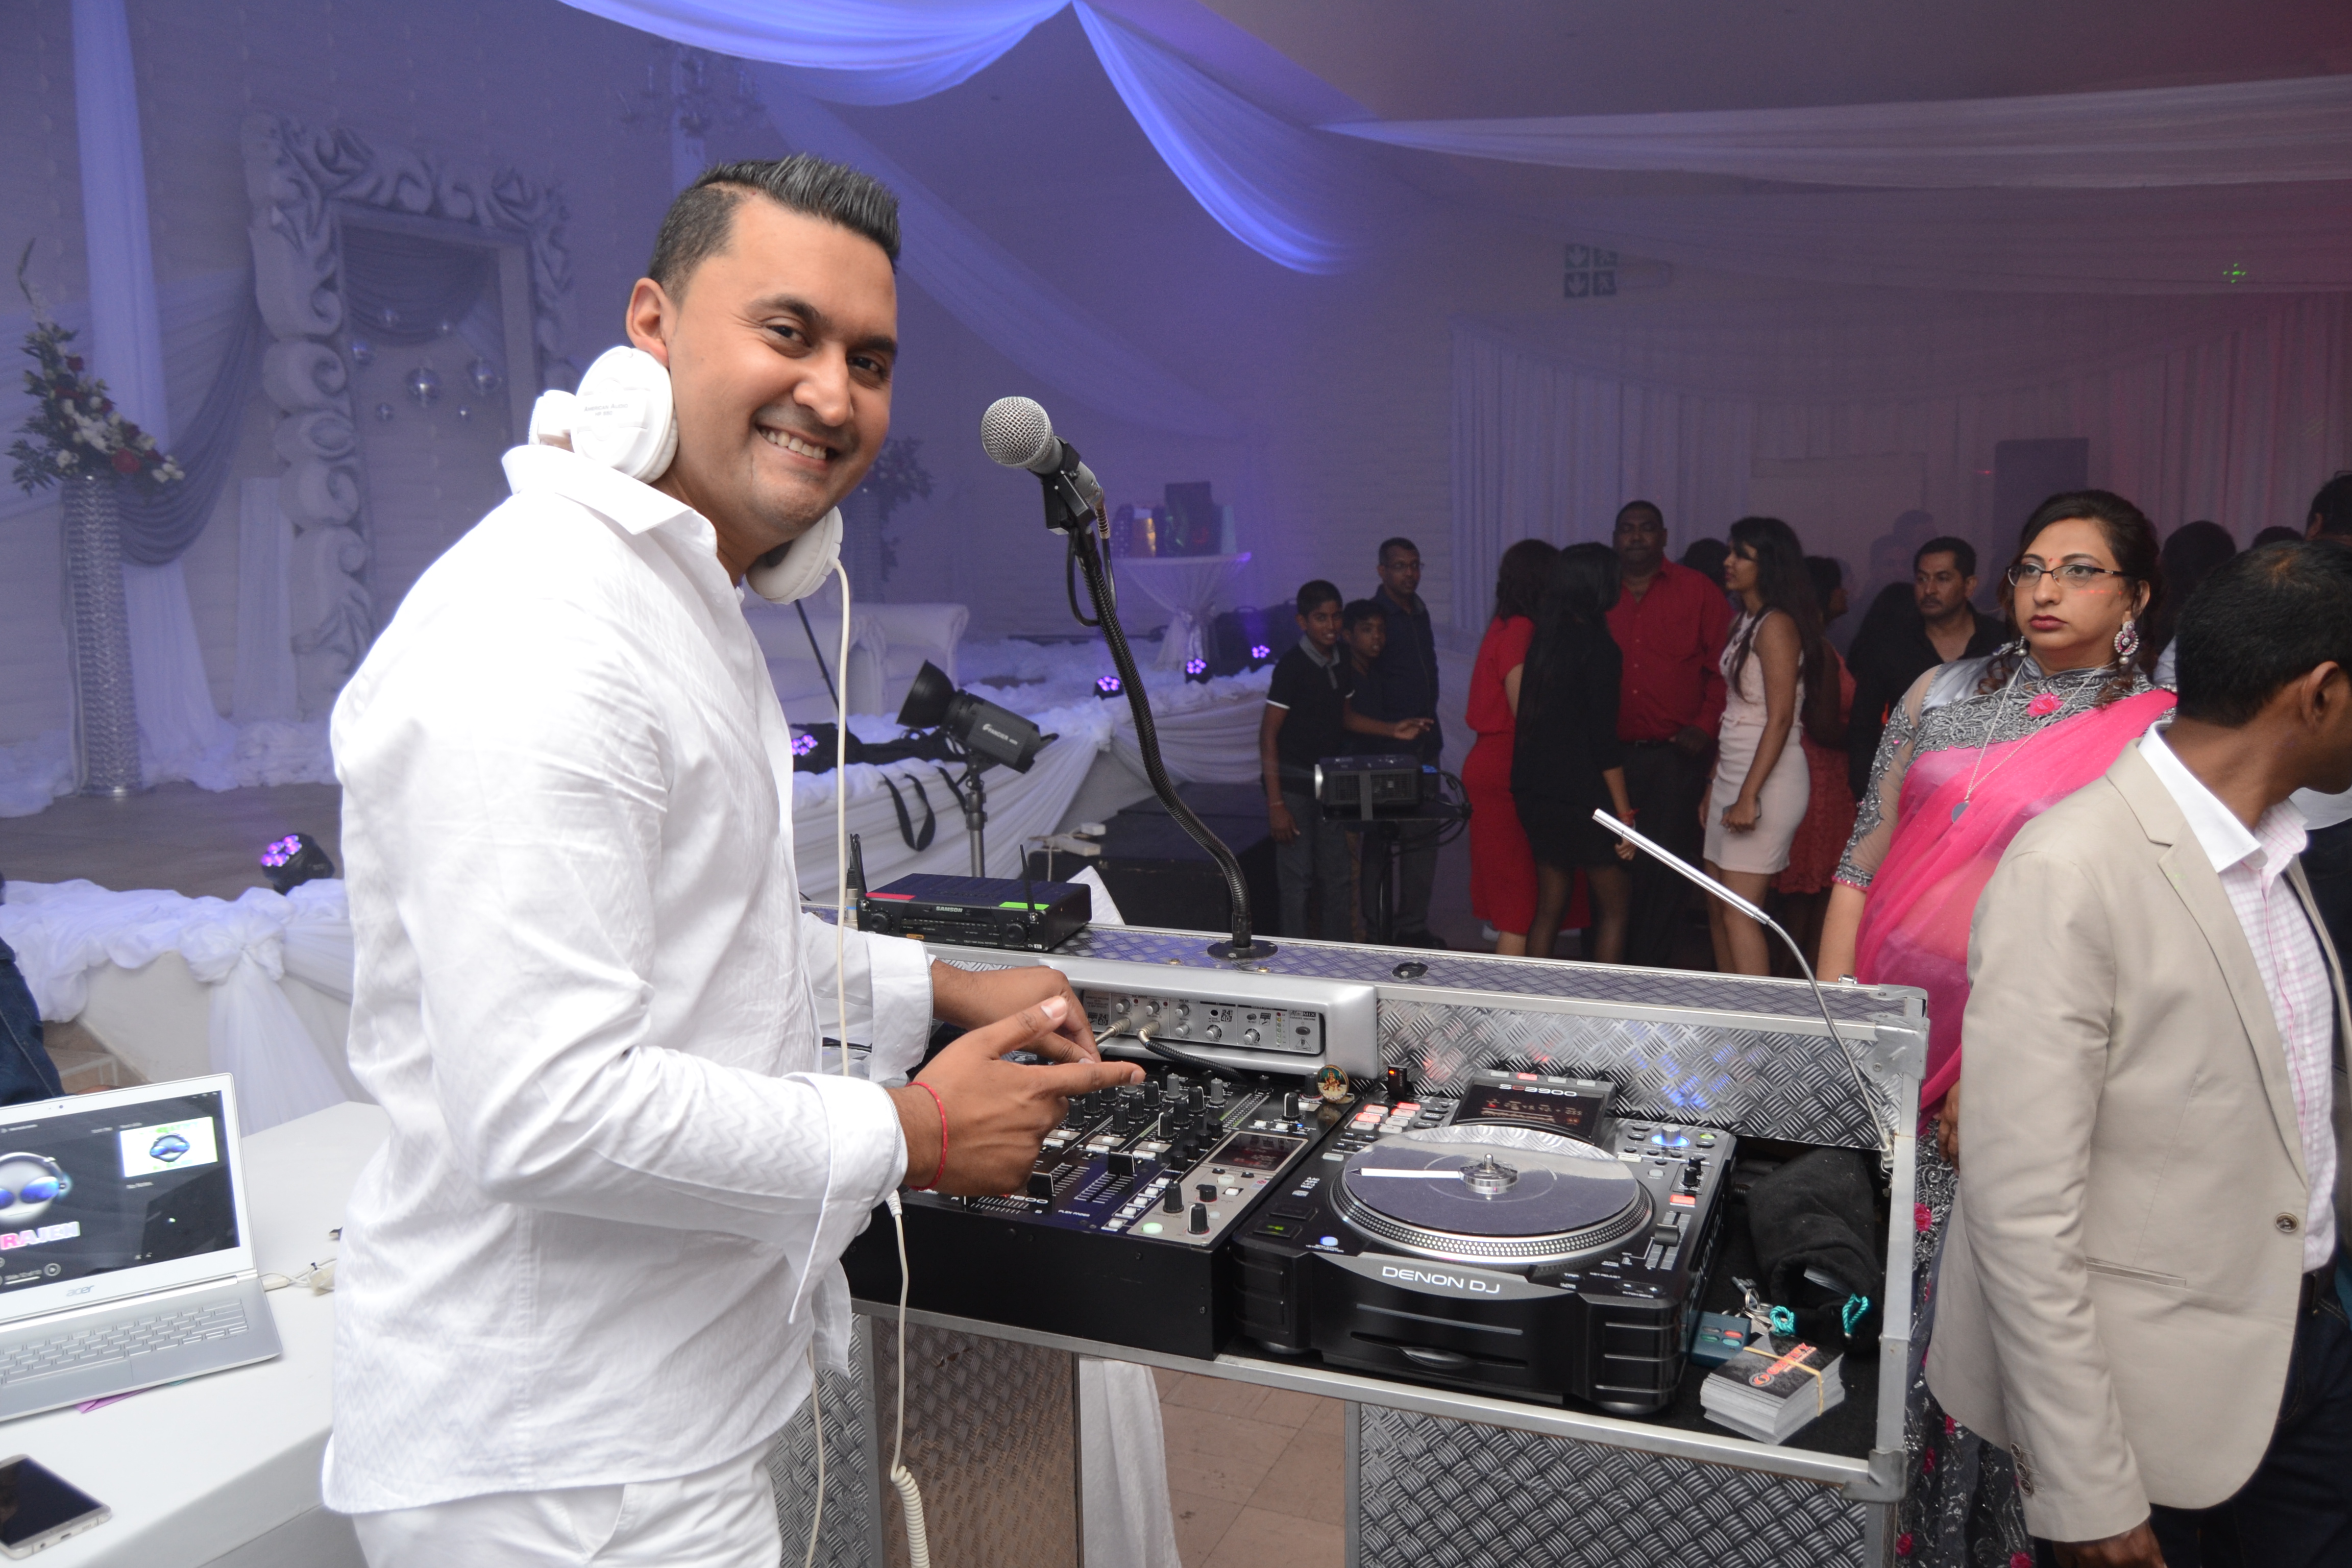 DJ RAJEN DISCO GRAVITY MOBILE DISCO FOR HIRE STAGE PLATFORM FOR HIRE LIGHTING FOR HIRE COLOUR WASH LIGHTING FOR HIRE DJ  FOR HIRE DJ EQUIPMENT FOR HIRE PROJECTOR AND SCREEN FOR HIRE